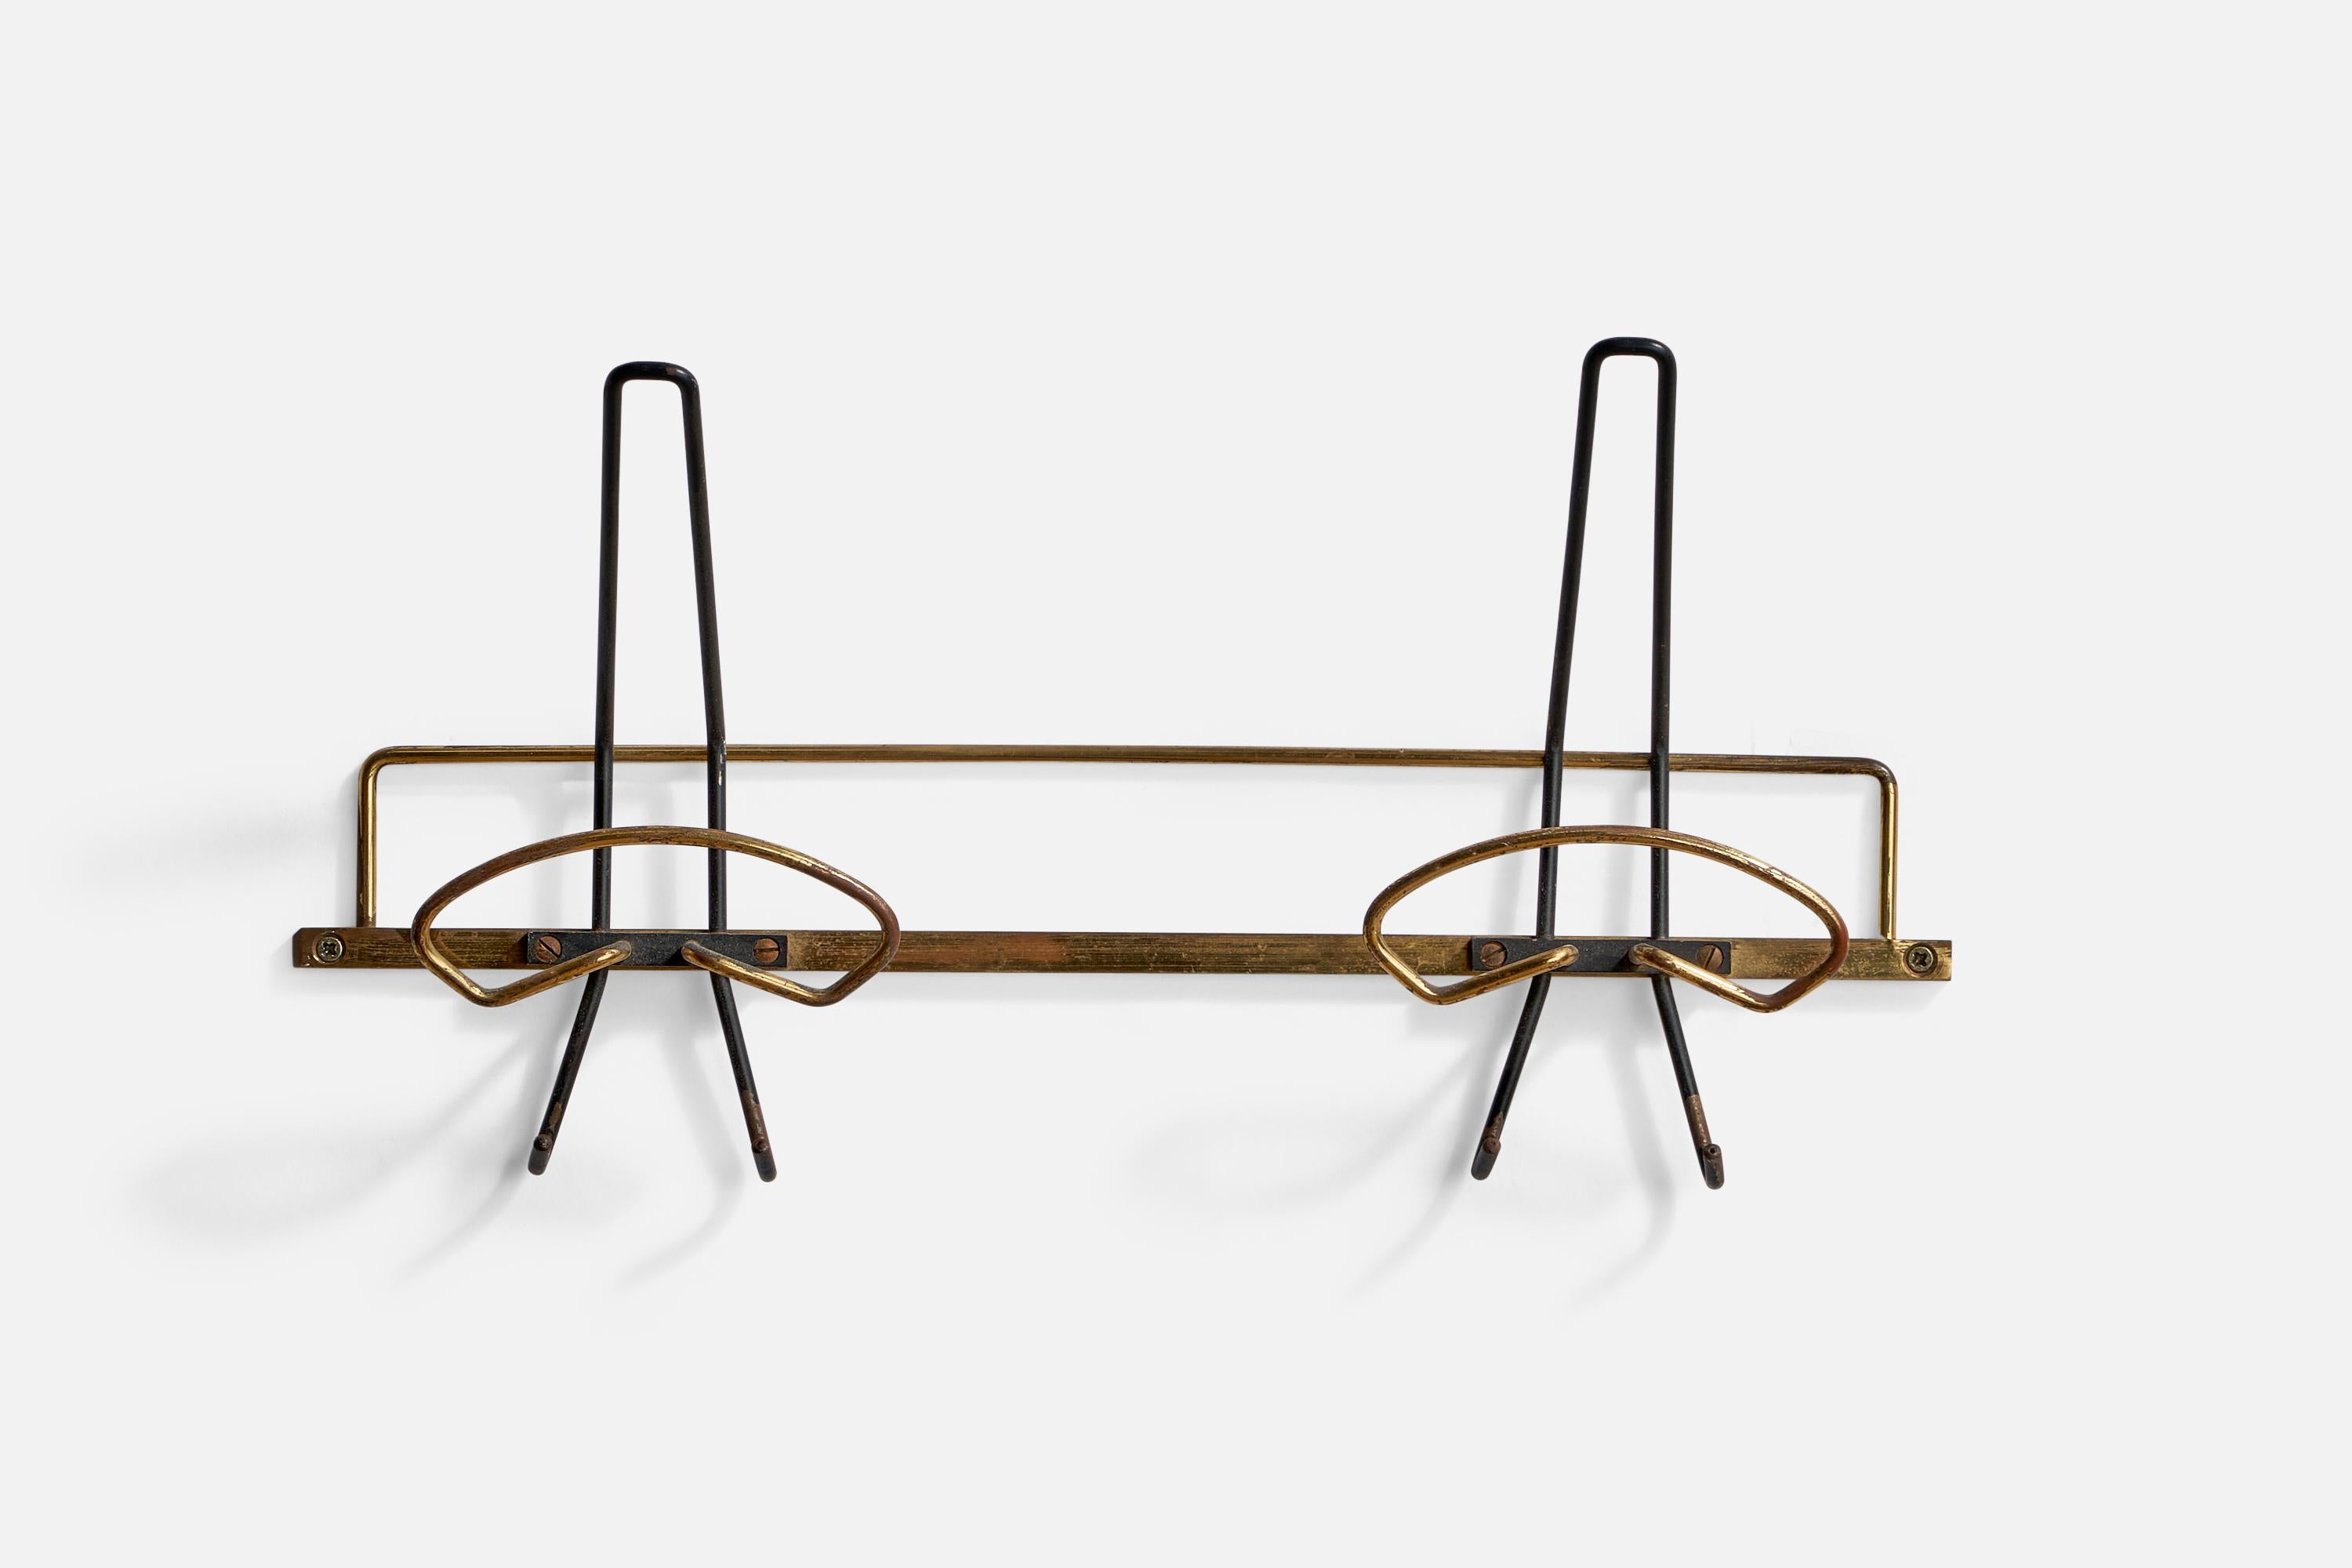 A brass and black-lacquered metal coat rack designed and produced in Italy, 1950s.